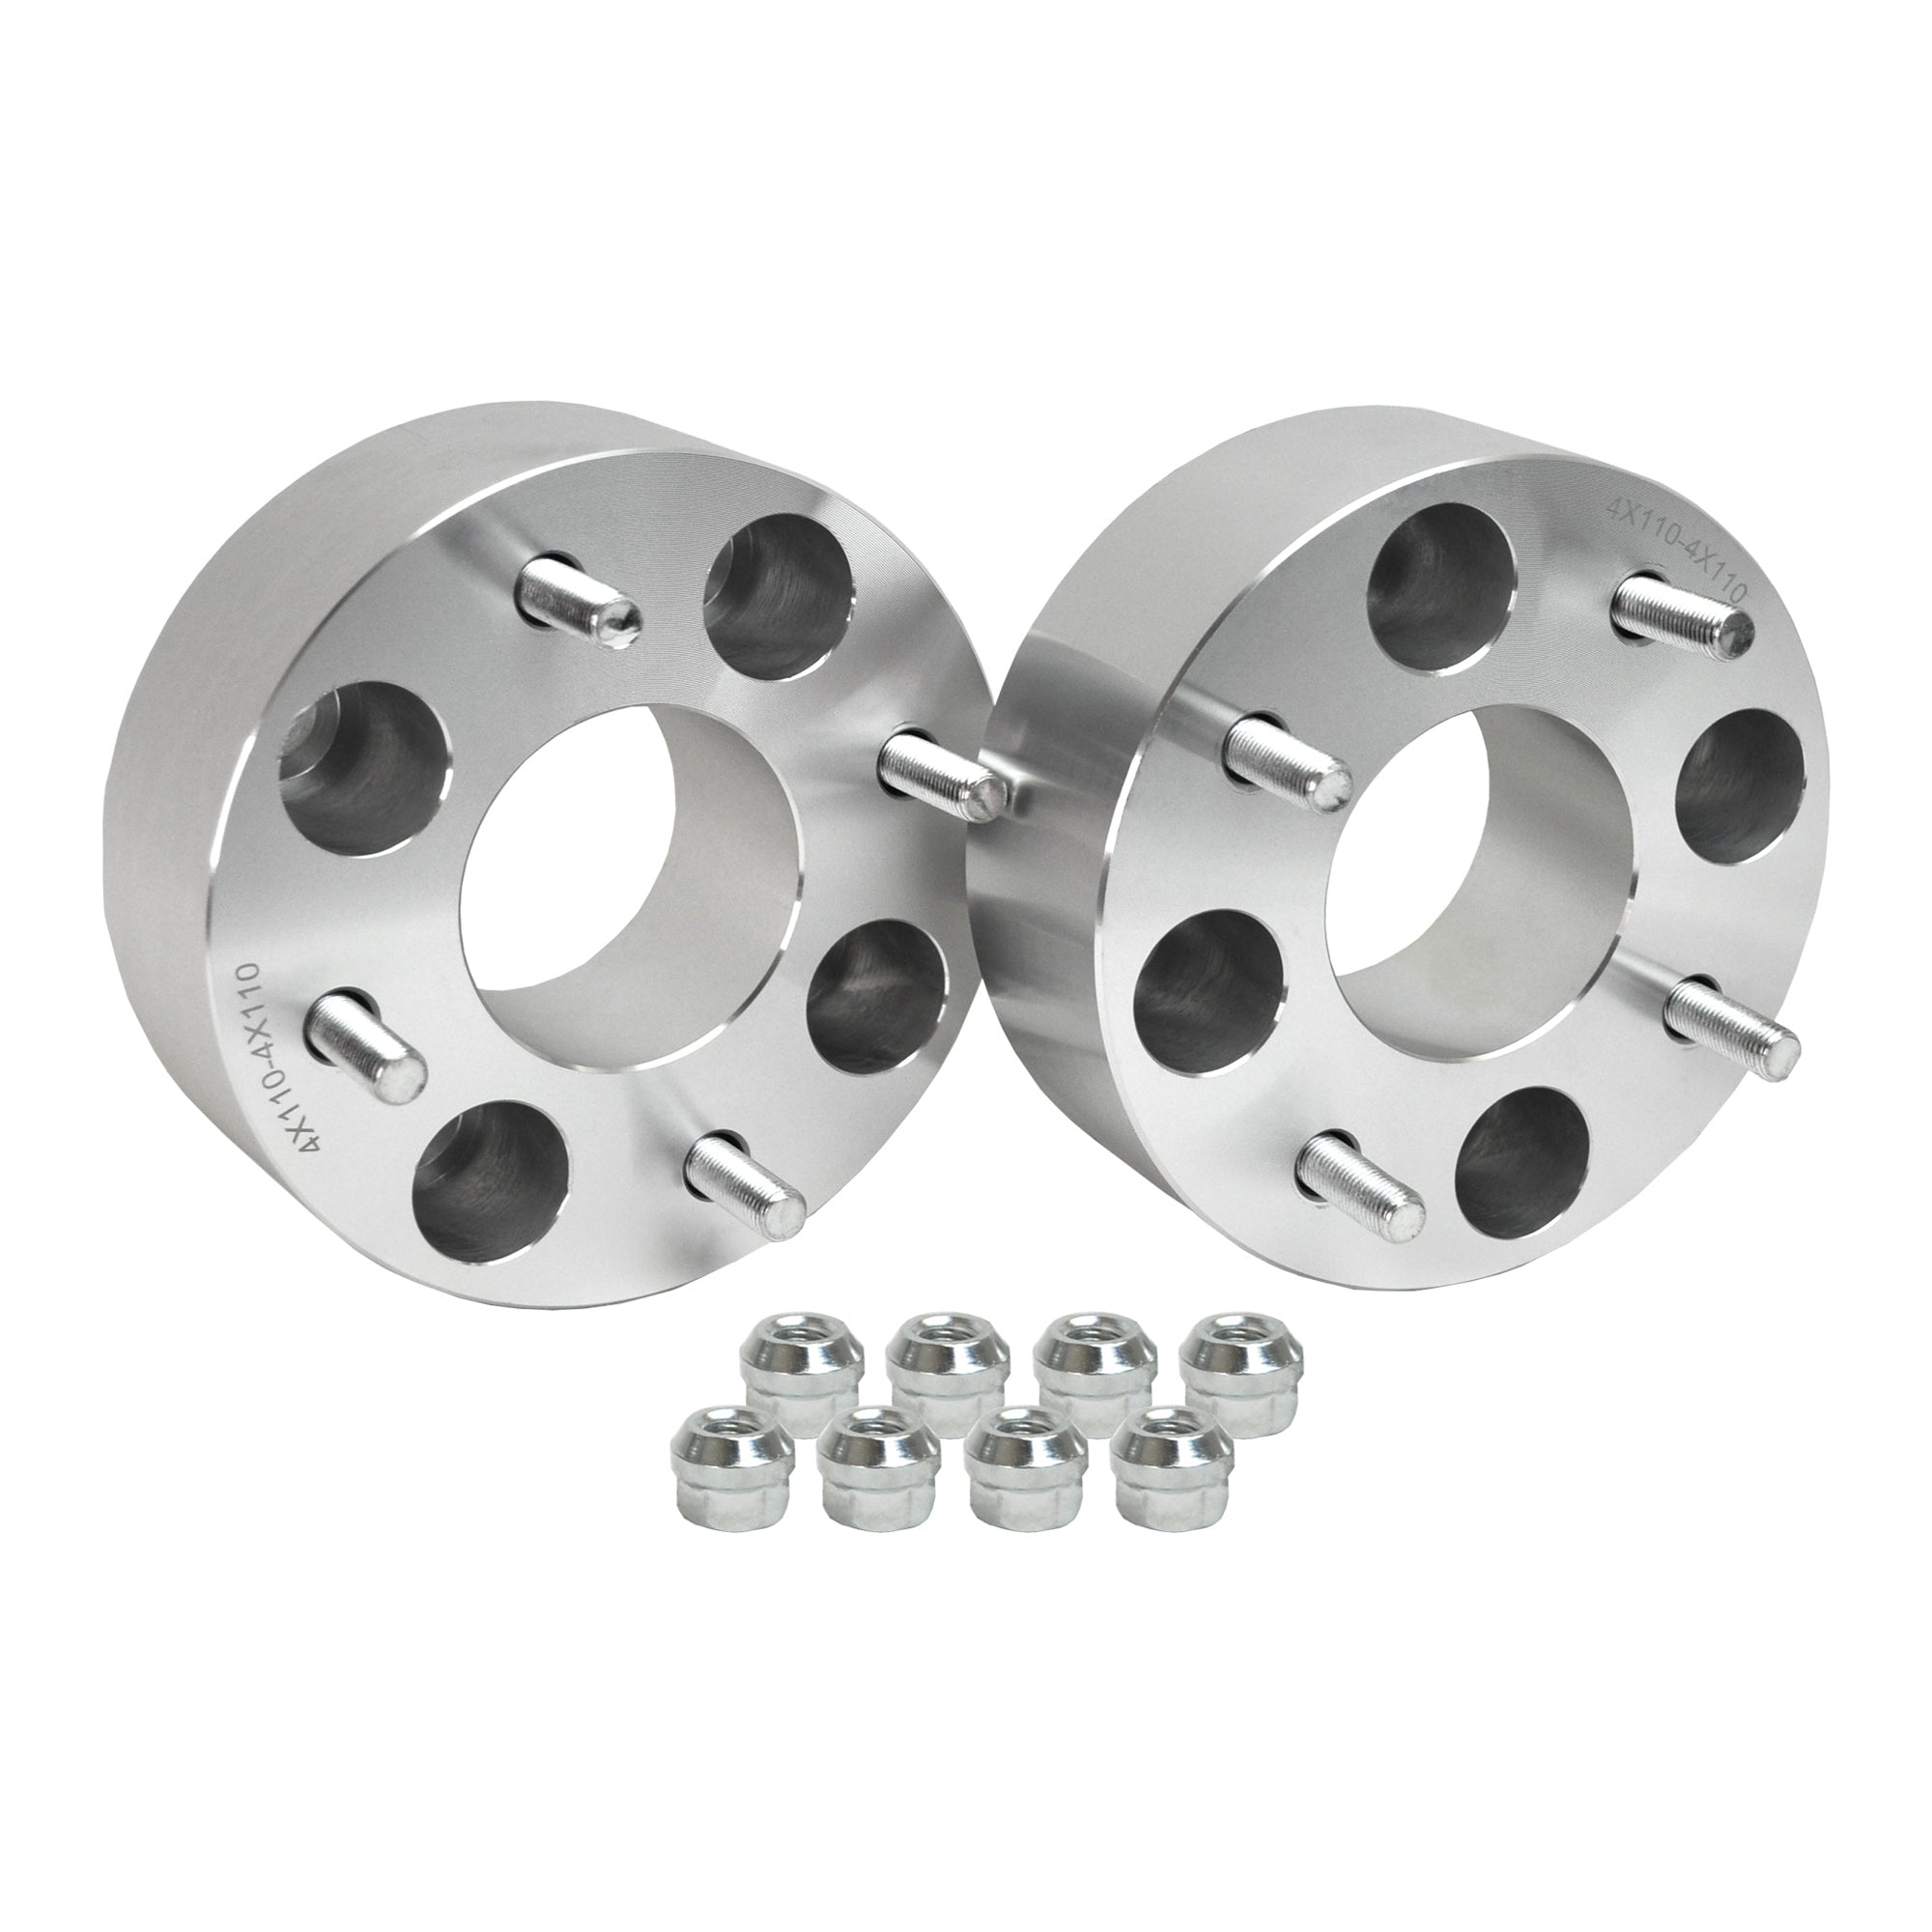 Wheel Spacer for Yamaha Grizzly 450 